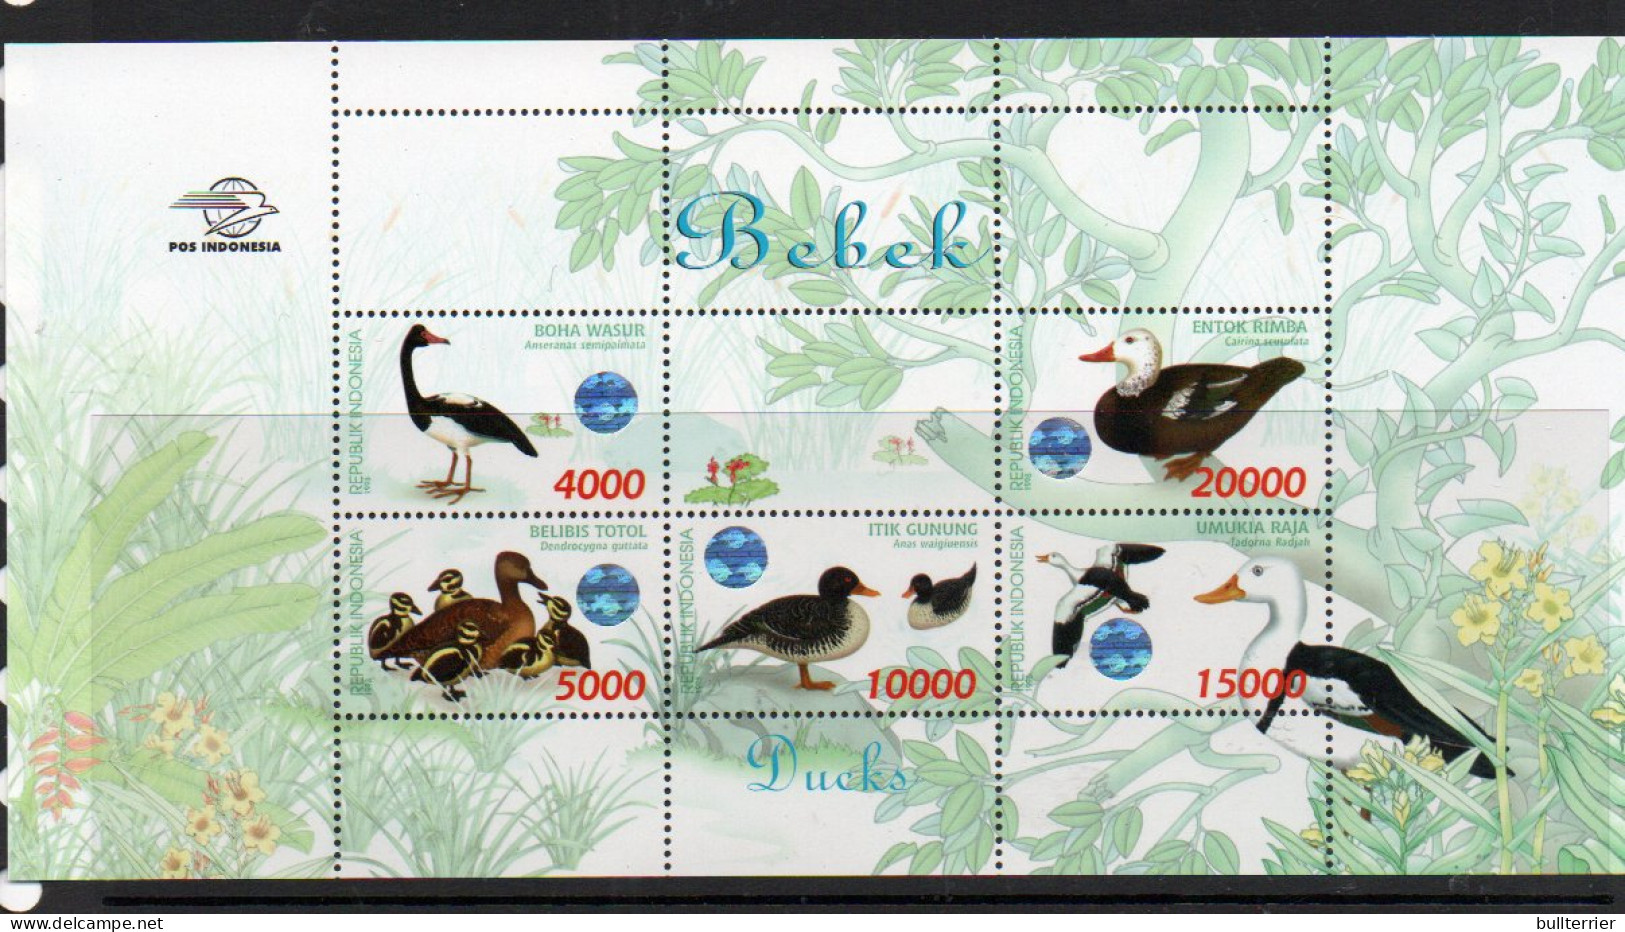 BIRDS - INDONESIA-  1998- WATERFOWL SOUVENIR SHEET  MINT NEVER HINGED,SG £30 - Piccioni & Colombe